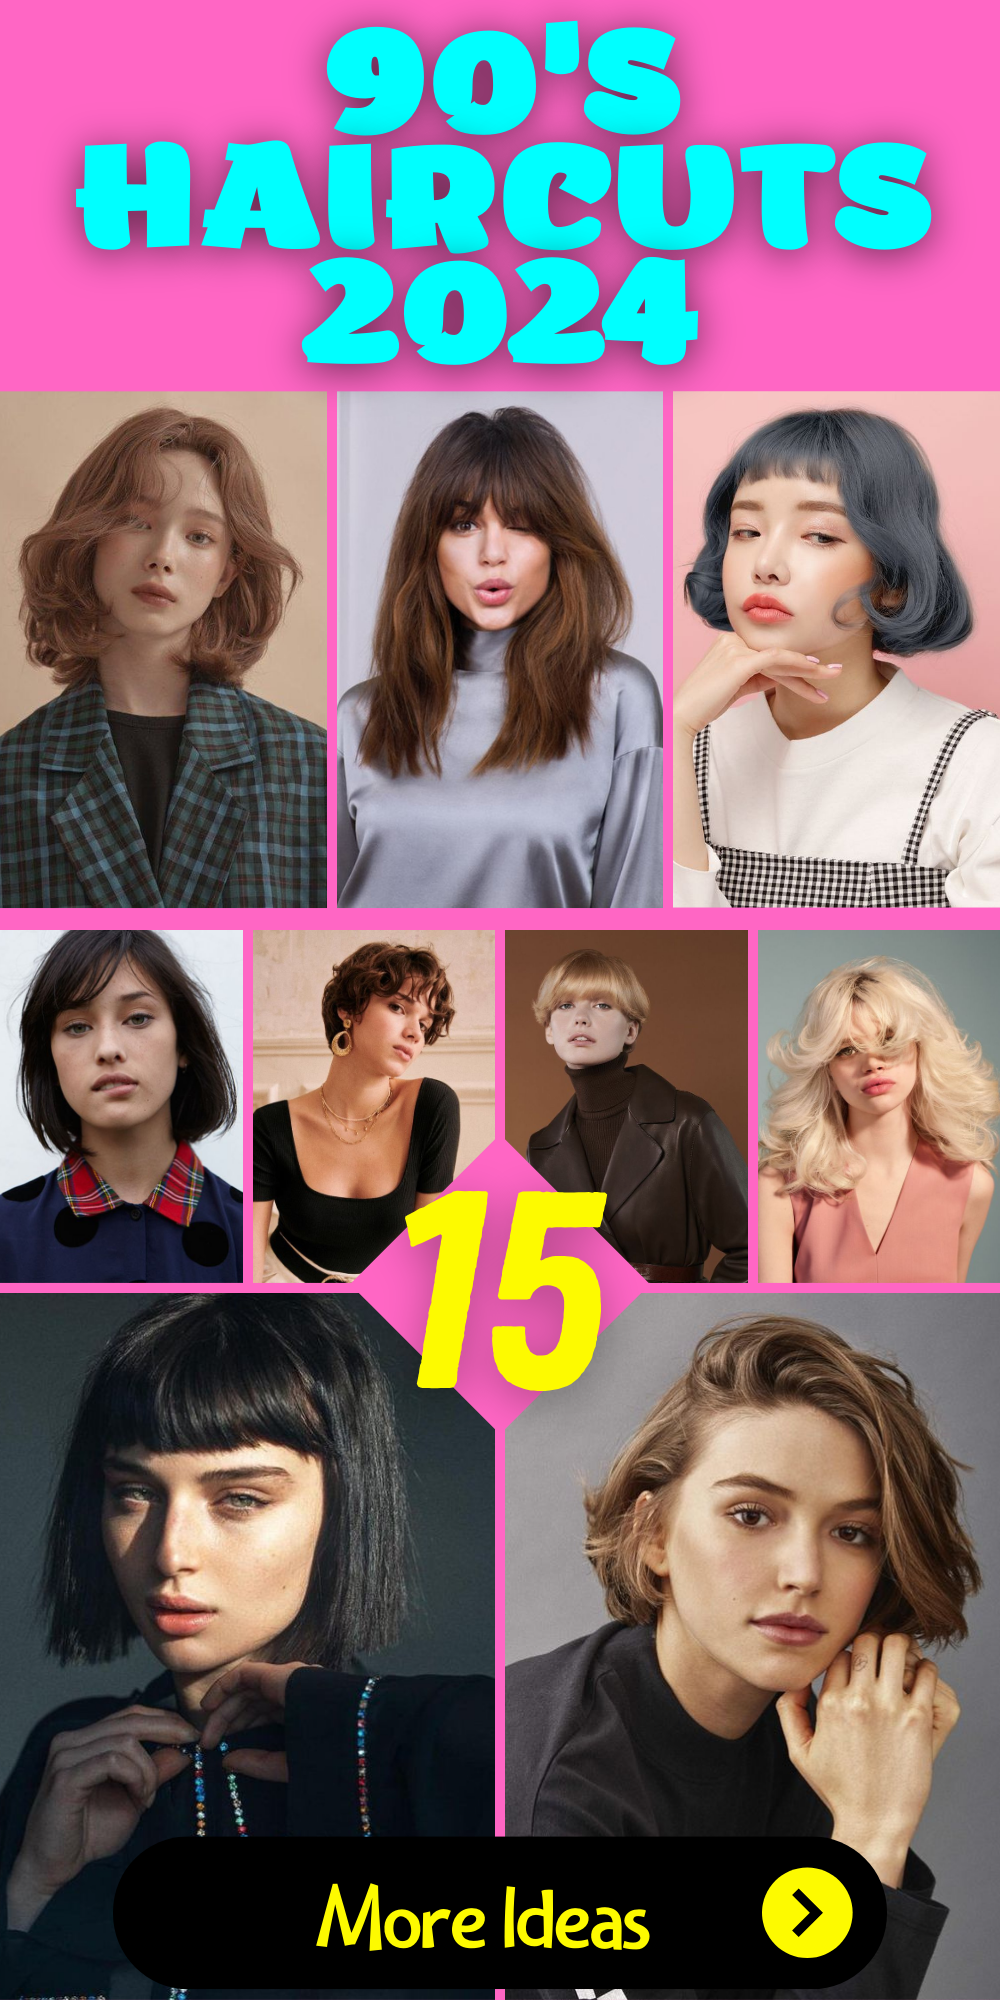 90s Haircuts Revival: Trendy Styles for 2024 - Long, Short & Curly Looks